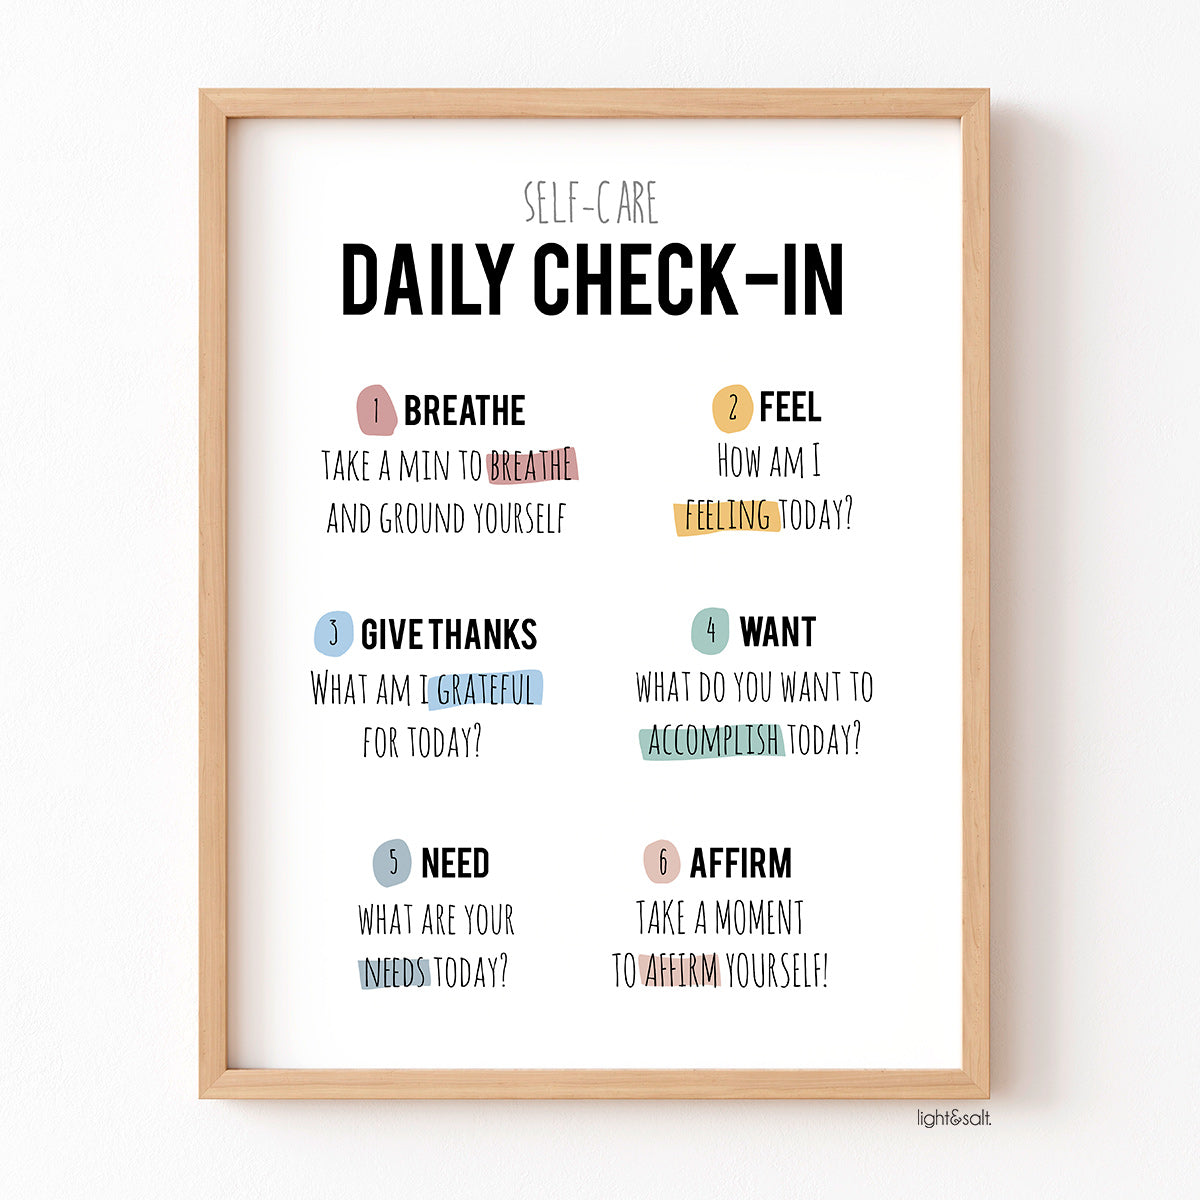 Self care daily check-in poster